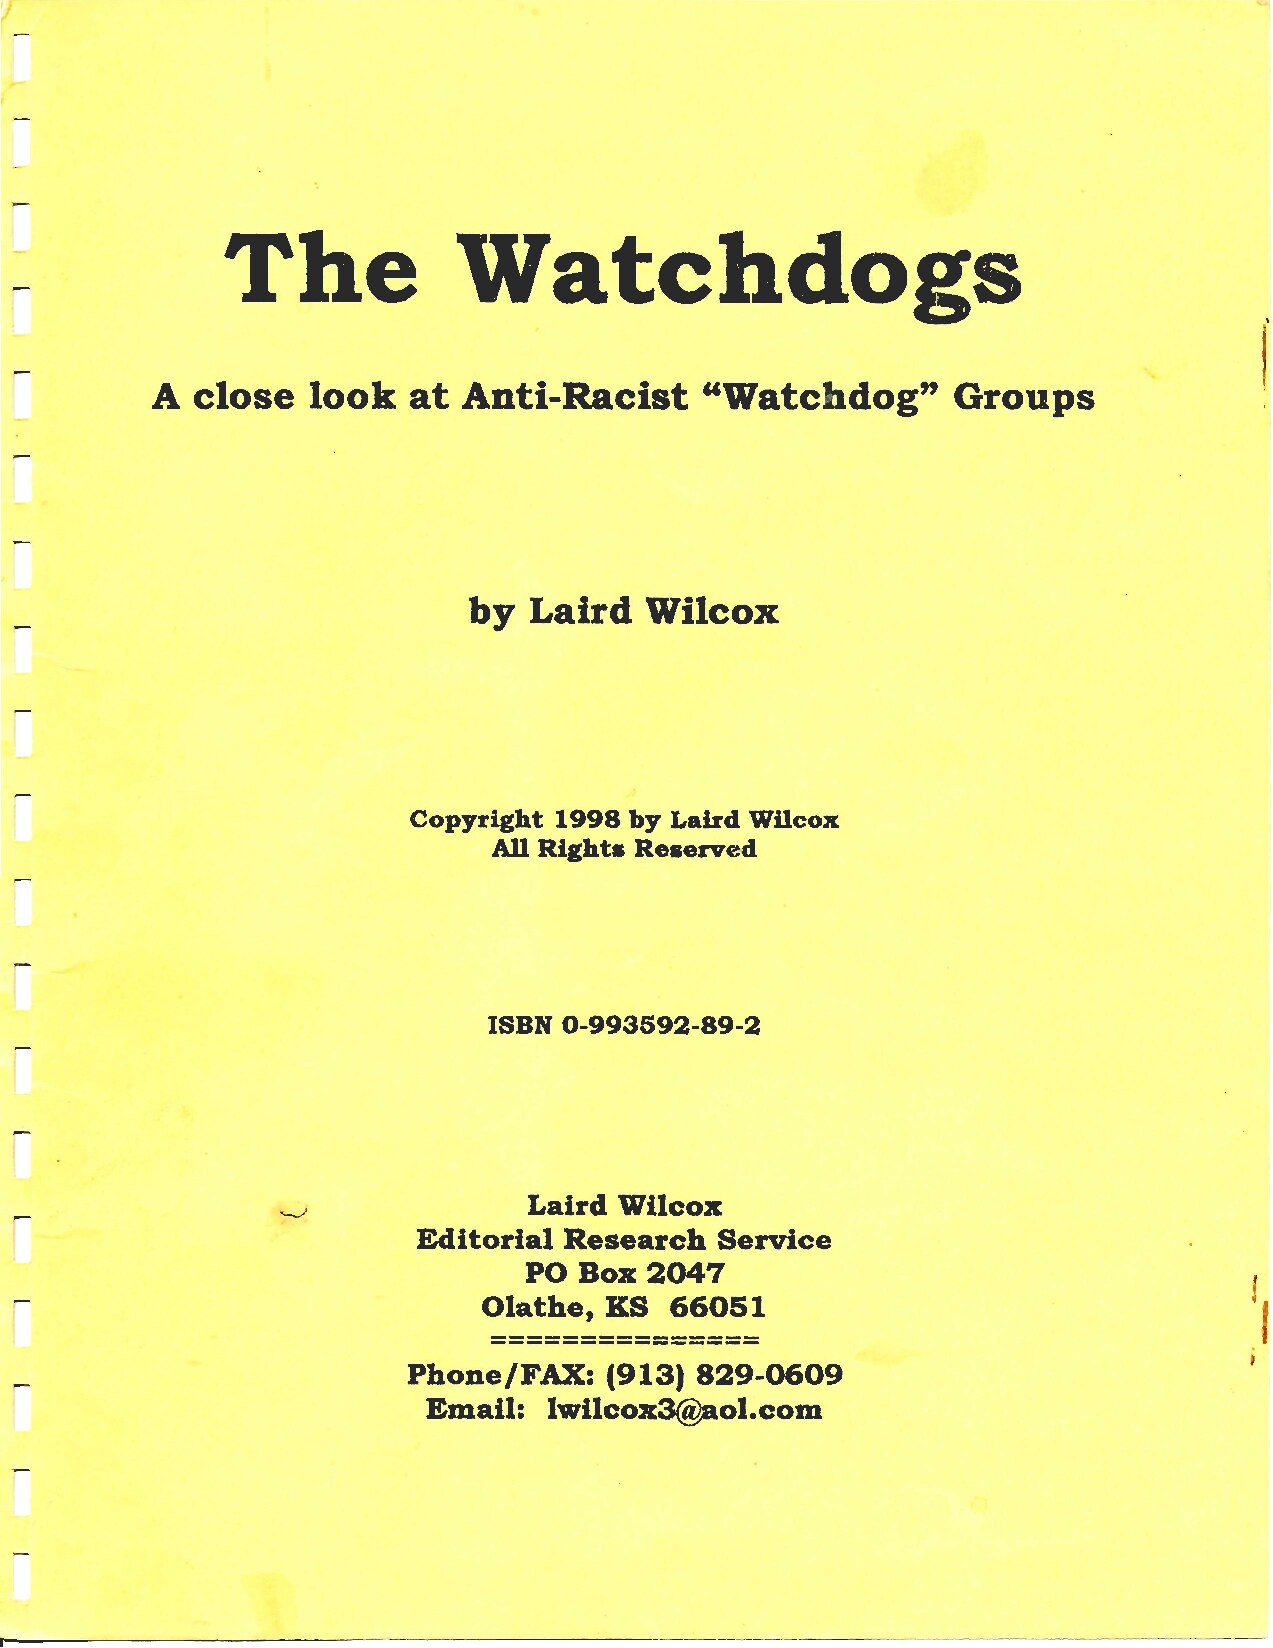 Wilcox, Laird; The Watchdogs - A Closer Look at Anti-Racist Watchdog Groups